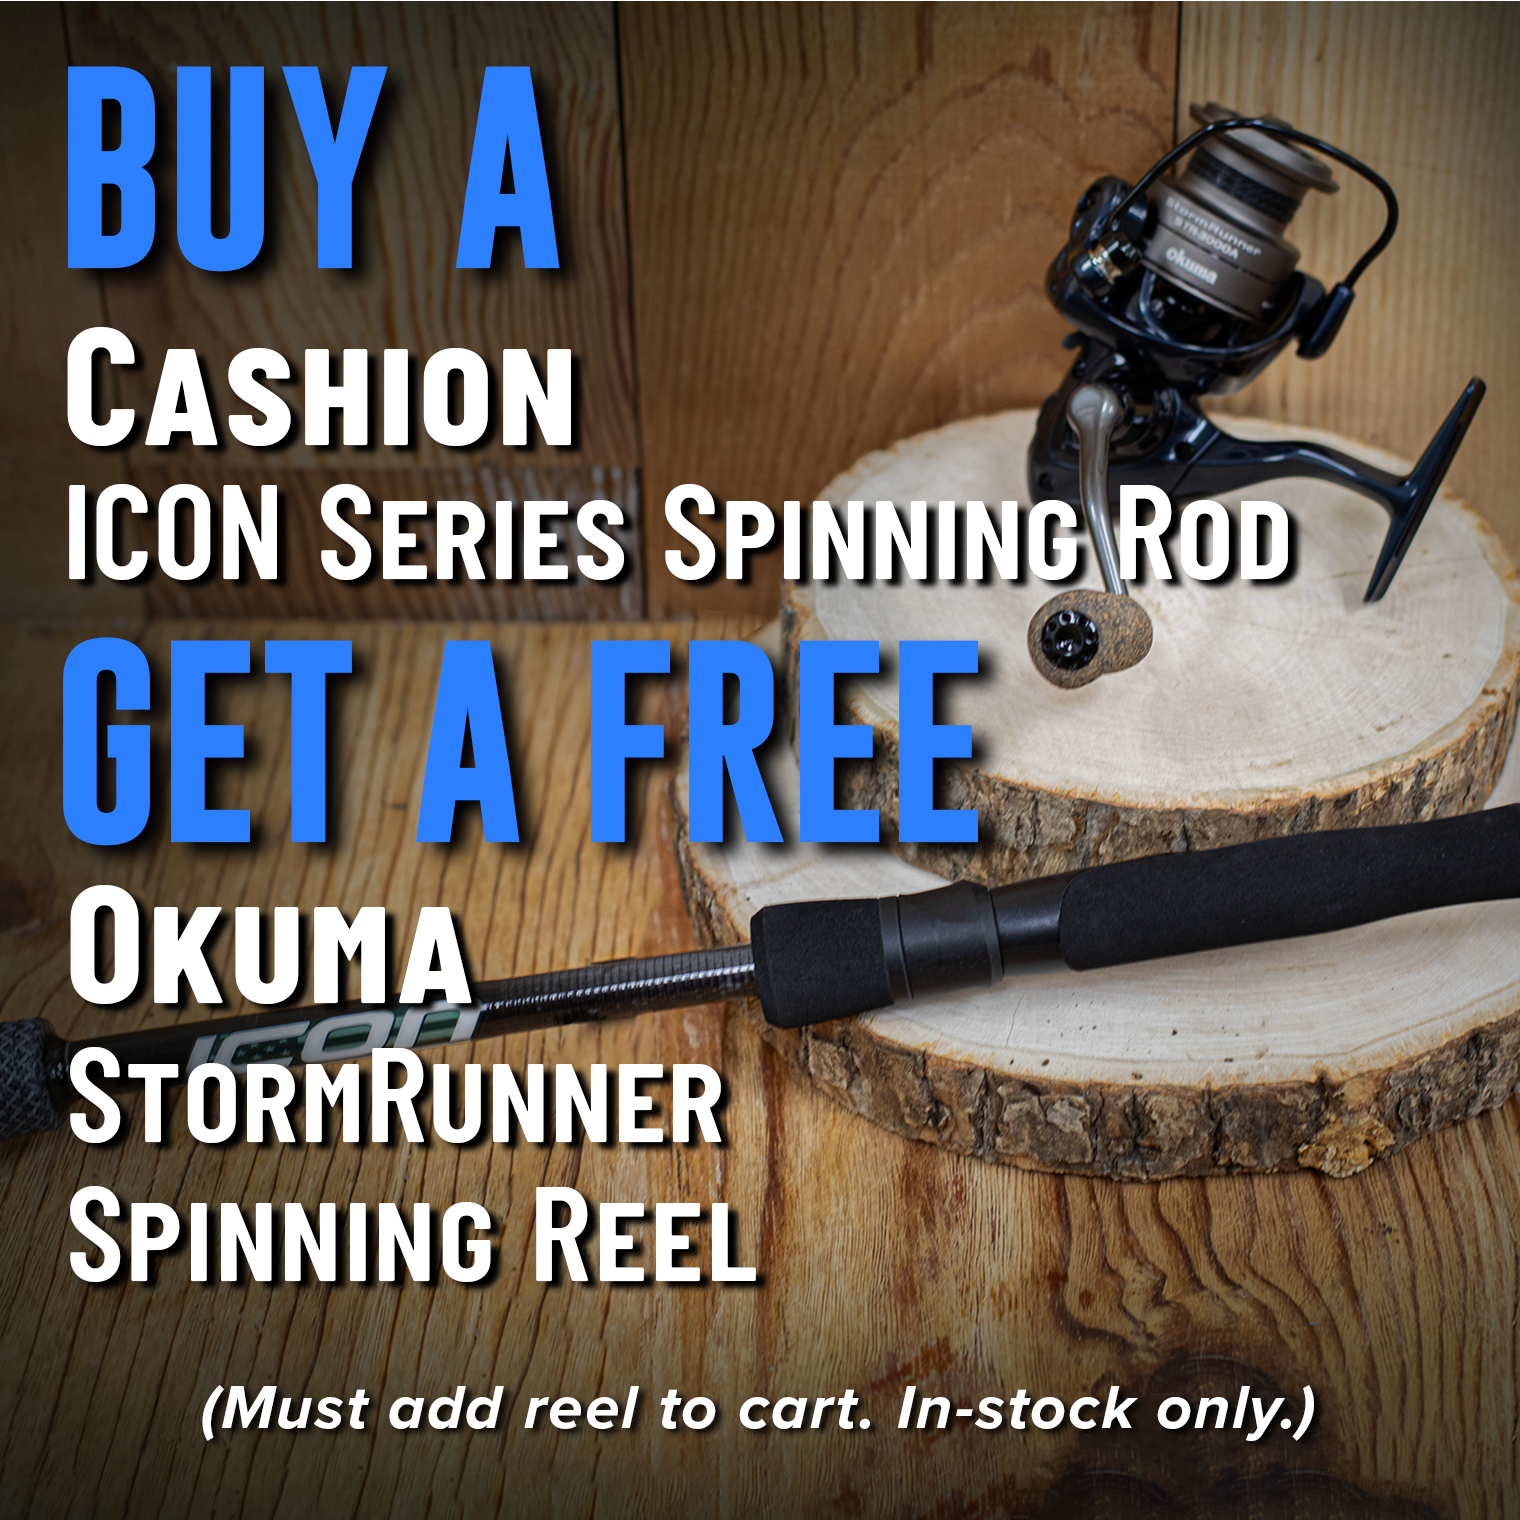 Buy a Cashion ICON Series Spinning Rod Get a Free Okuma StormRunner Spinning Reel (Must add rod to cart. In-stock only.)